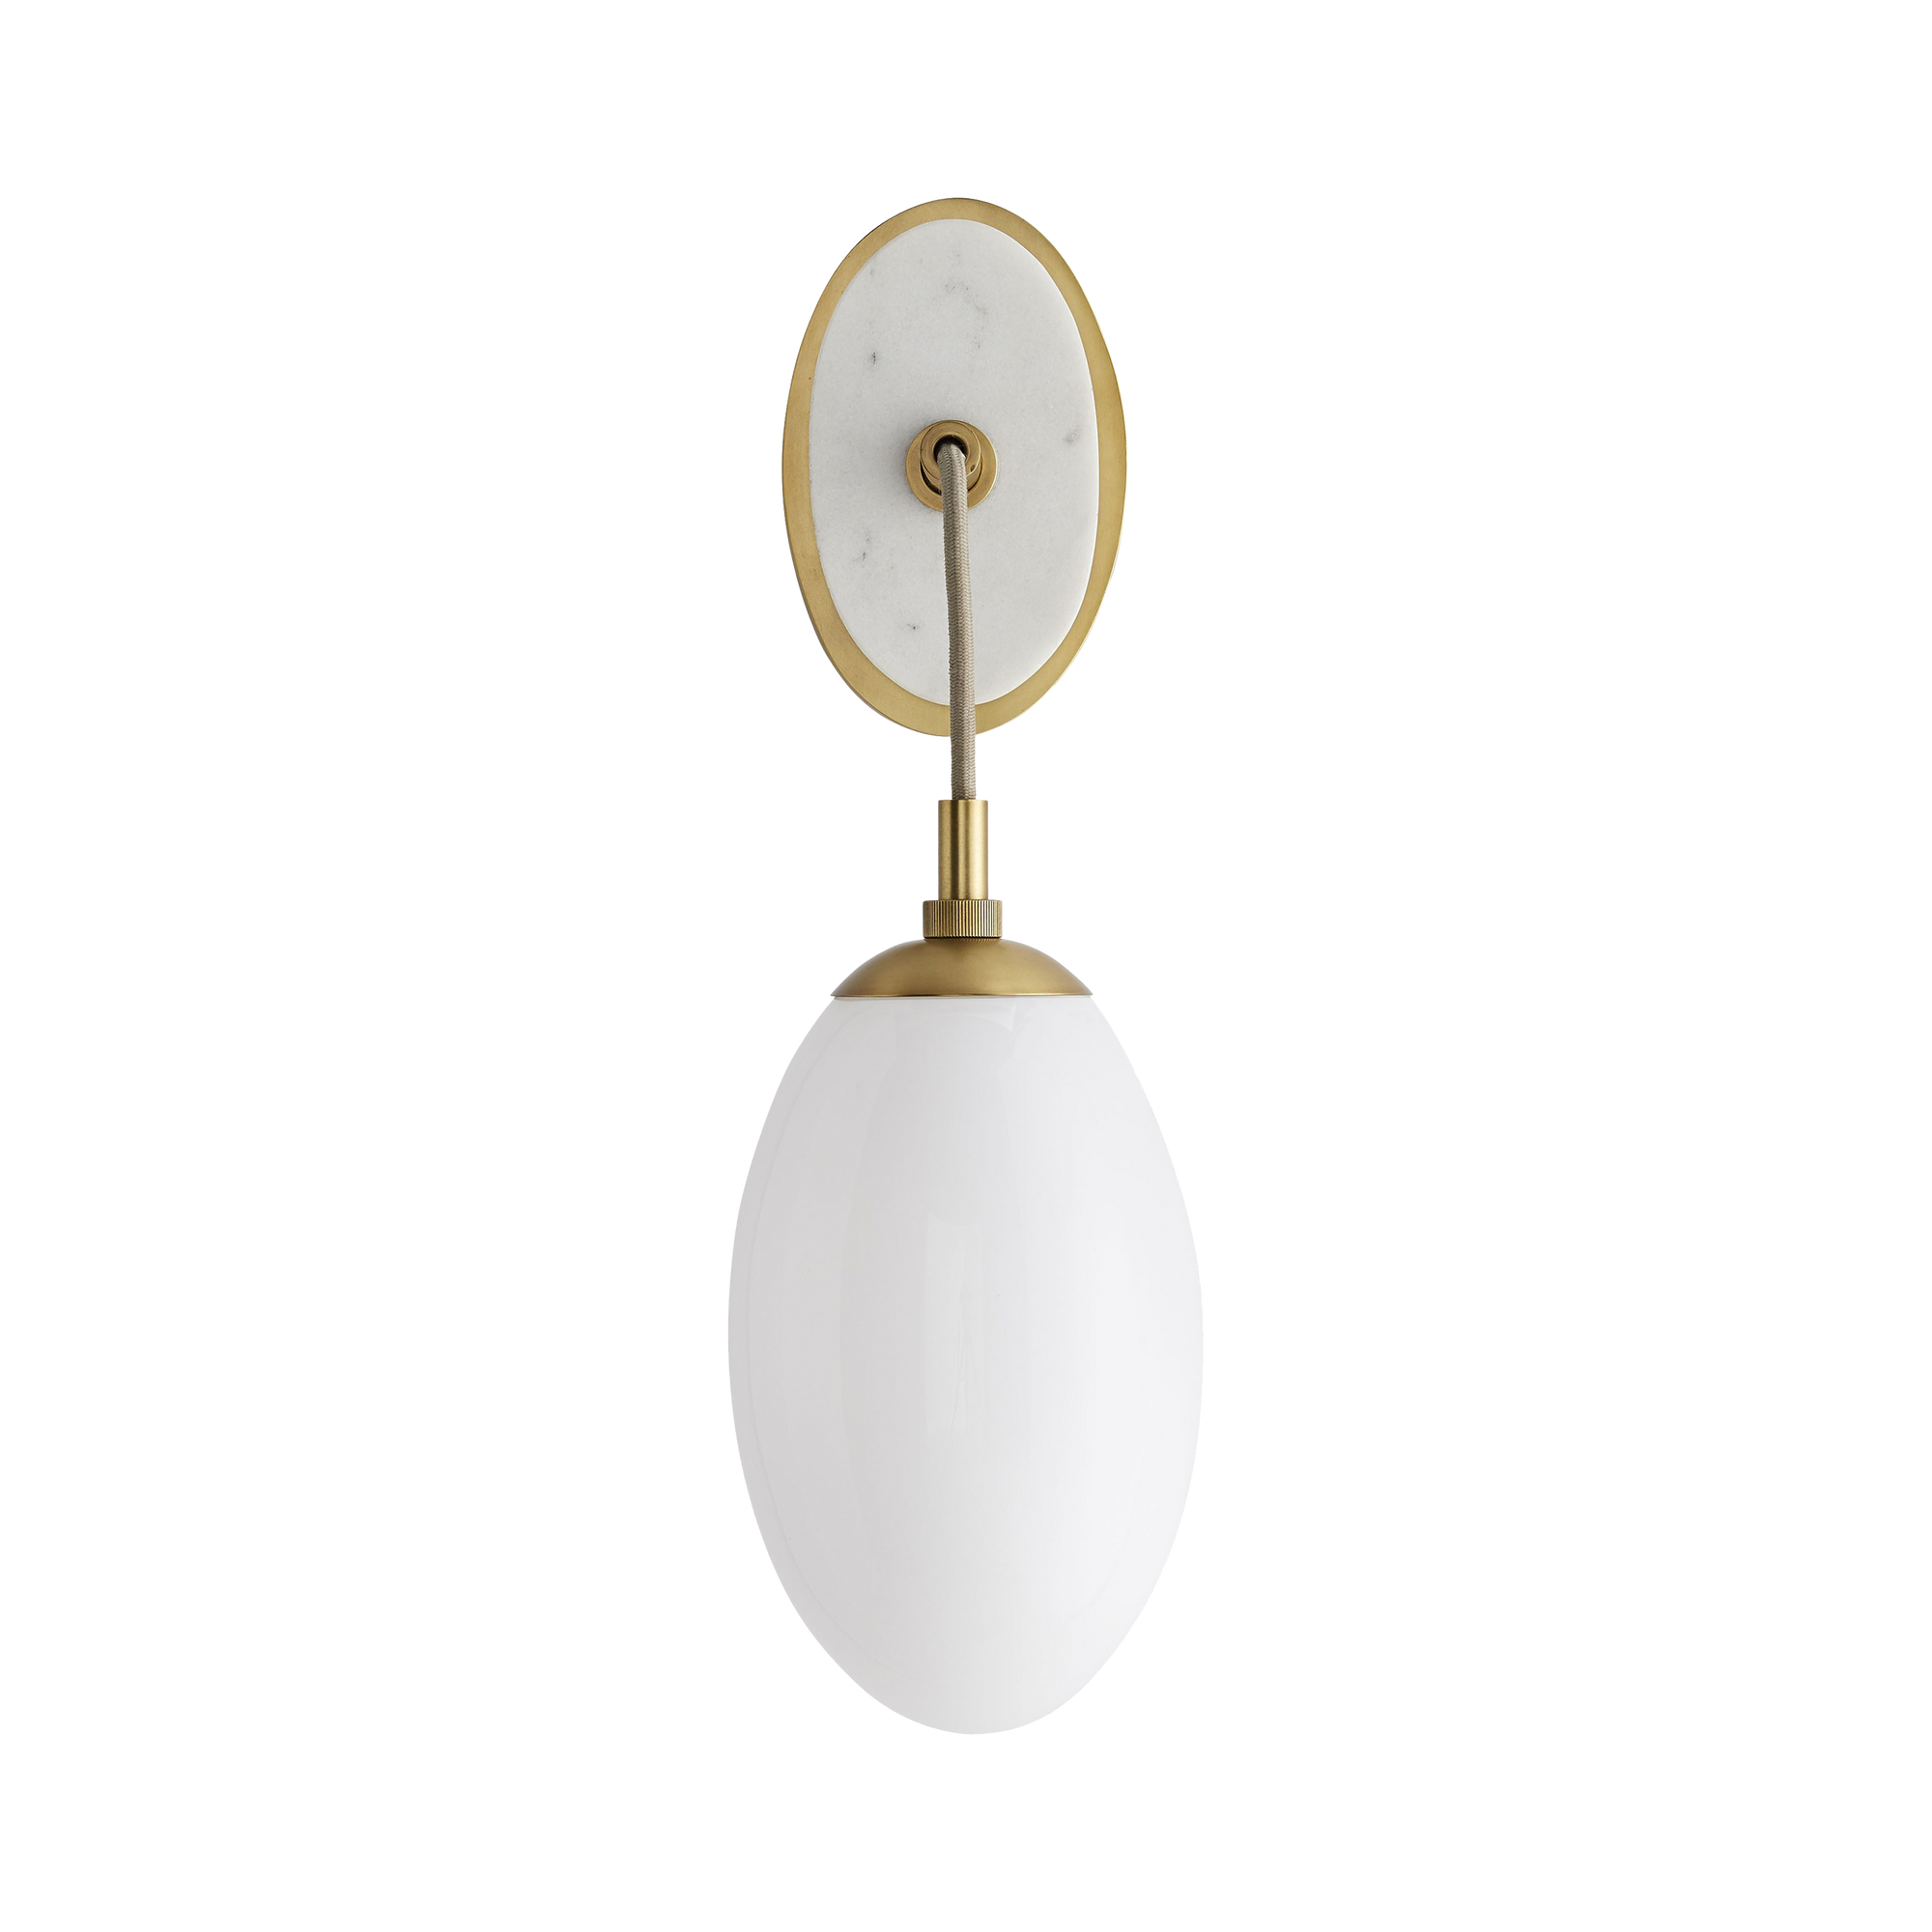 An oval, solid white marble stone, backed with steel finished in antique brass, showcases a large teardrop-shaped opal glass shade that is suspended by a taupe cloth cord, establis